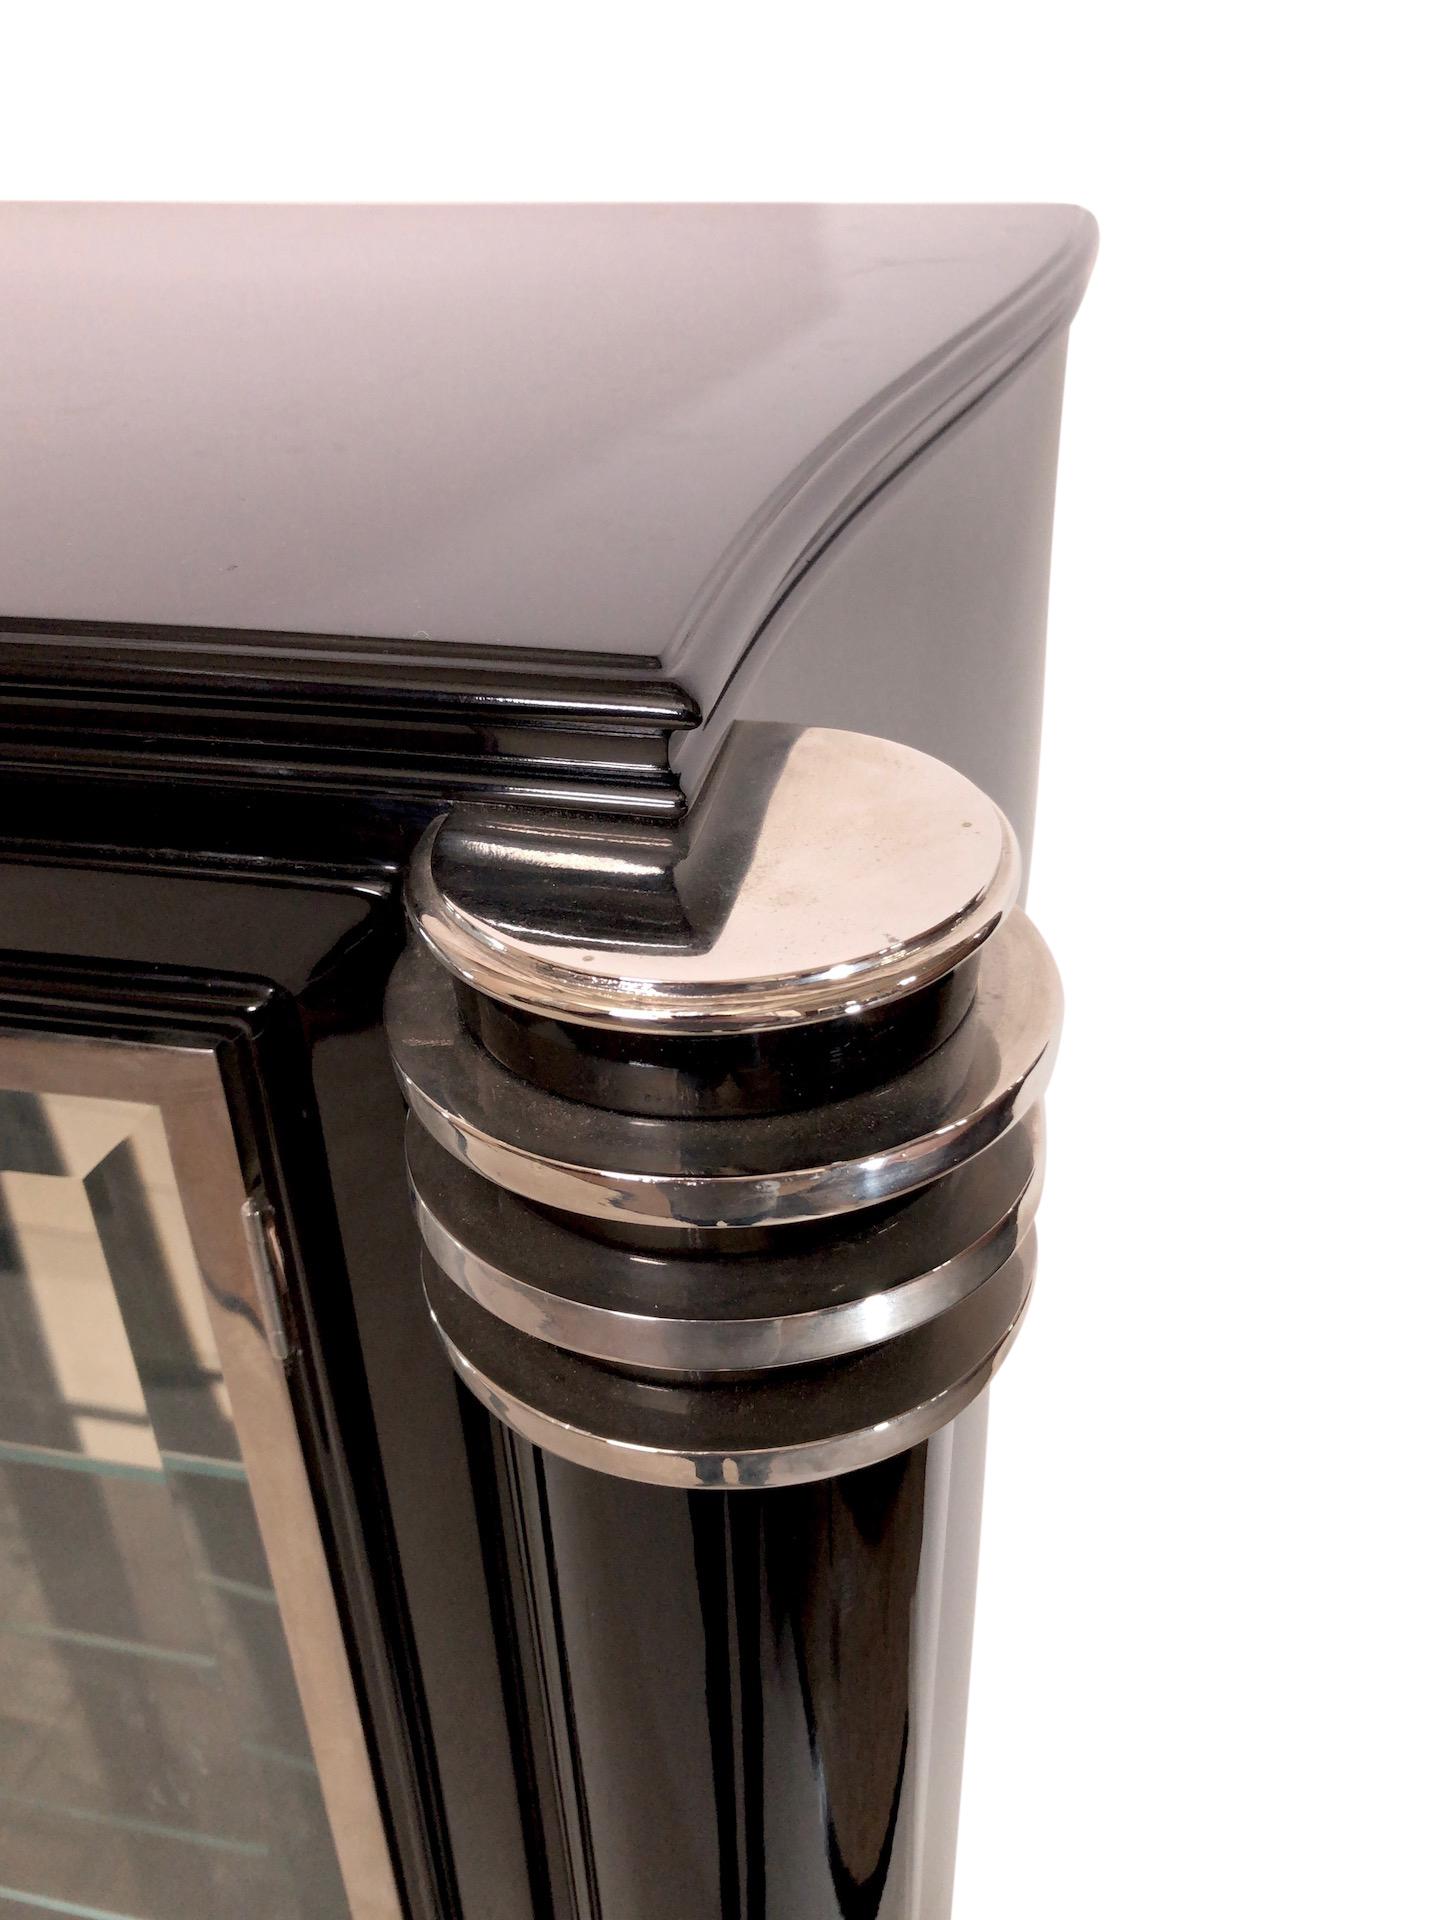 Vitrine and dry bar 
Under the vitrine is a bottle drawer in the middle and to doors on the sides 

High quality restoration:
all metal applications are original and fresh nickeled
Fresh installed mirrors inside the vitrine
Black piano lacquer